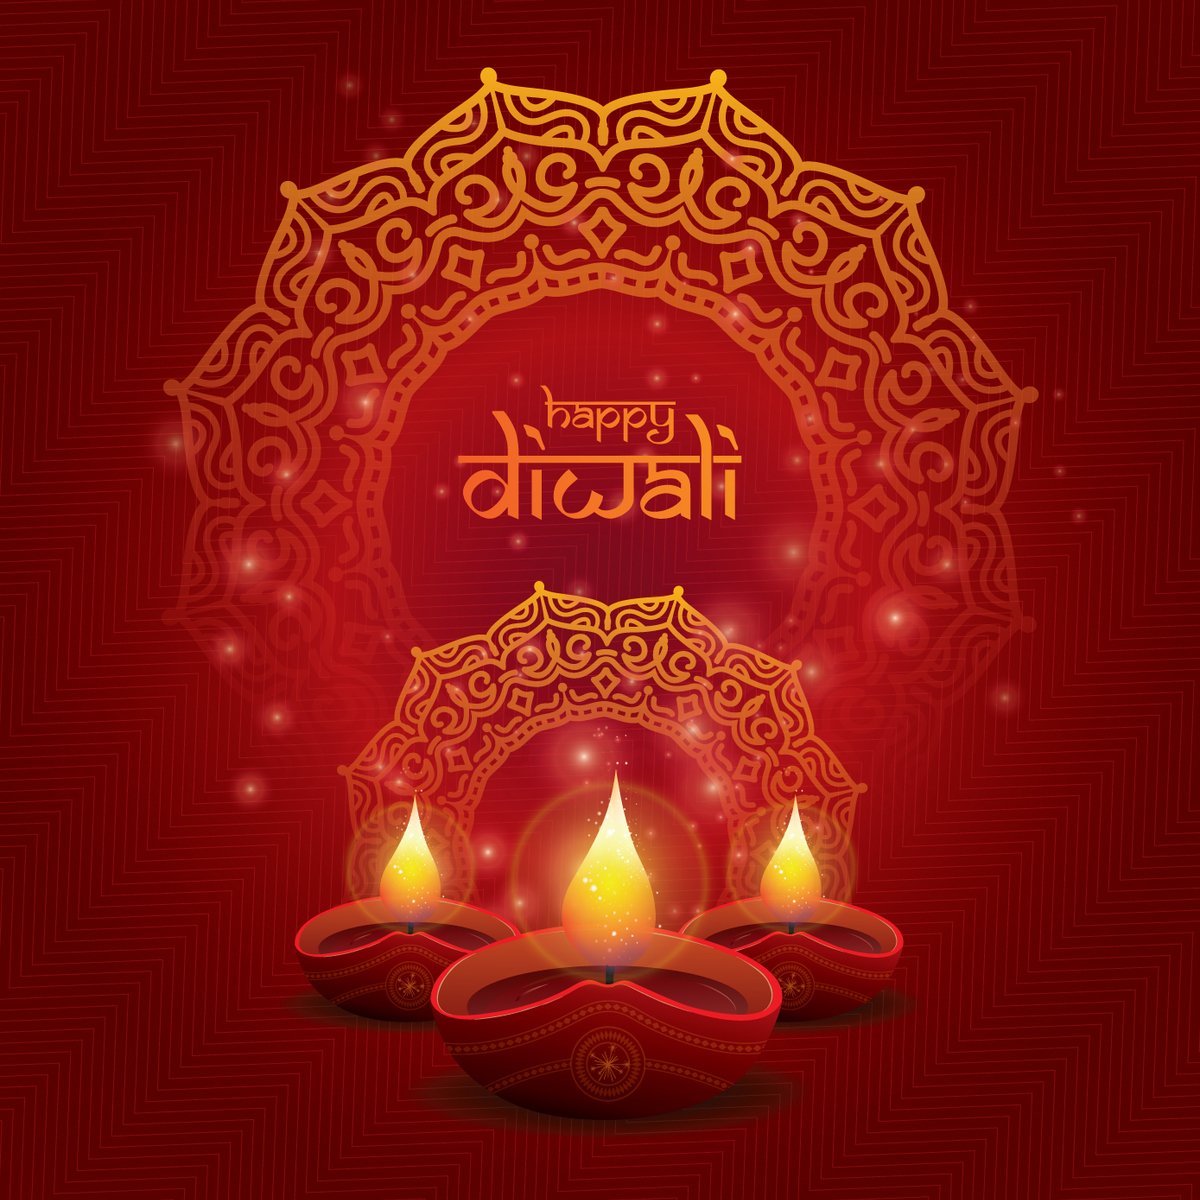 A very happy Diwali to all our Hindu friends and colleagues. Diwali is the Indian festival of lights, symbolising the spiritual 'victory of light over darkness, good over evil, and knowledge over ignorance.' #happydiwali #lightoverdarkness #diwali #diwali2021